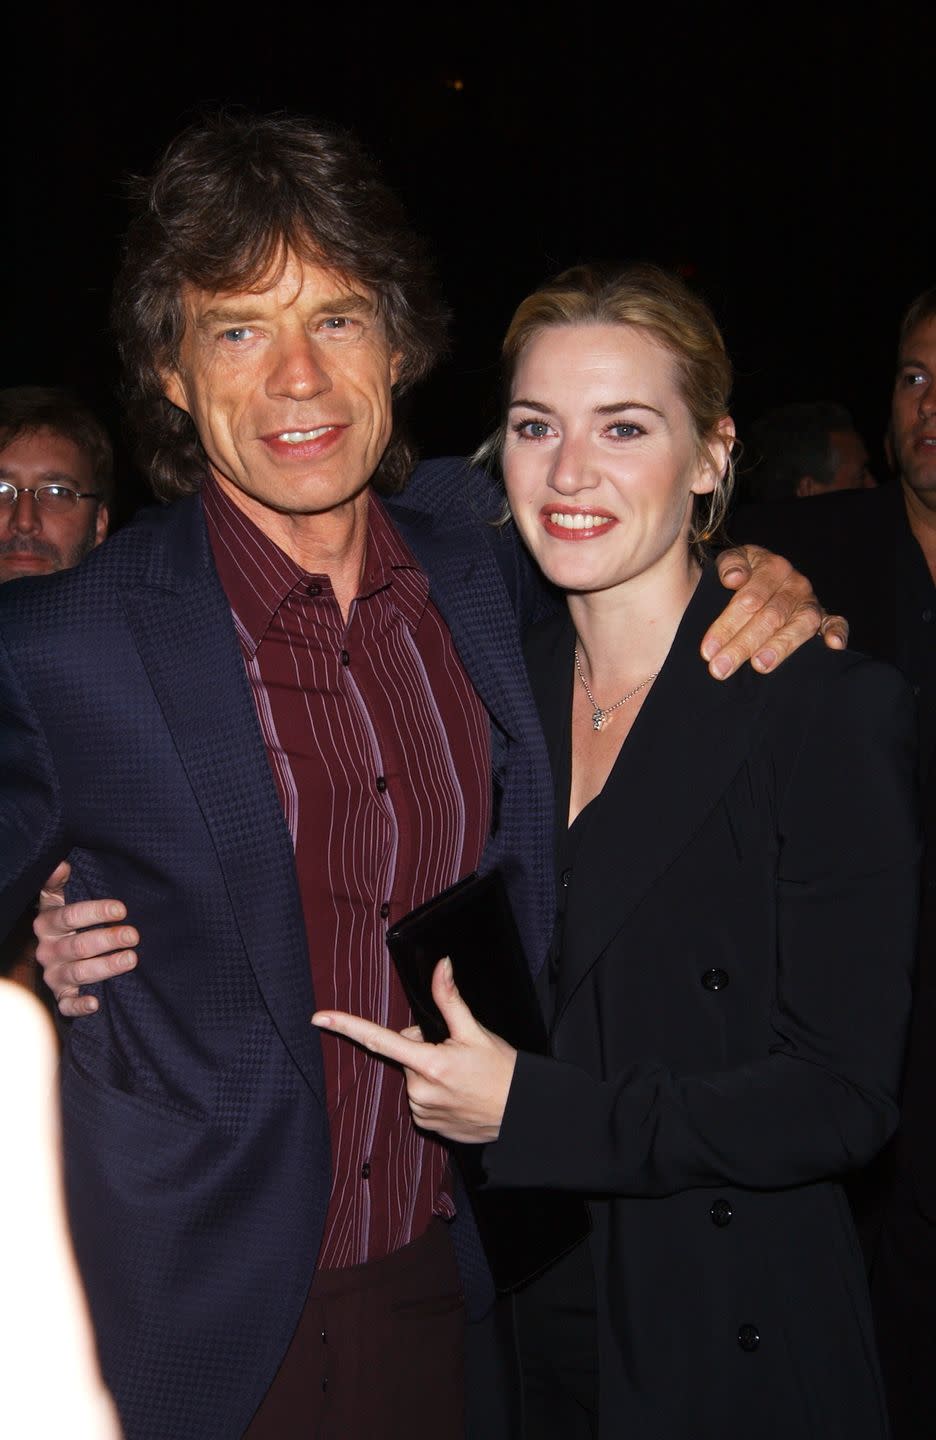 mick jagger and kate winslet get together at the beekman the